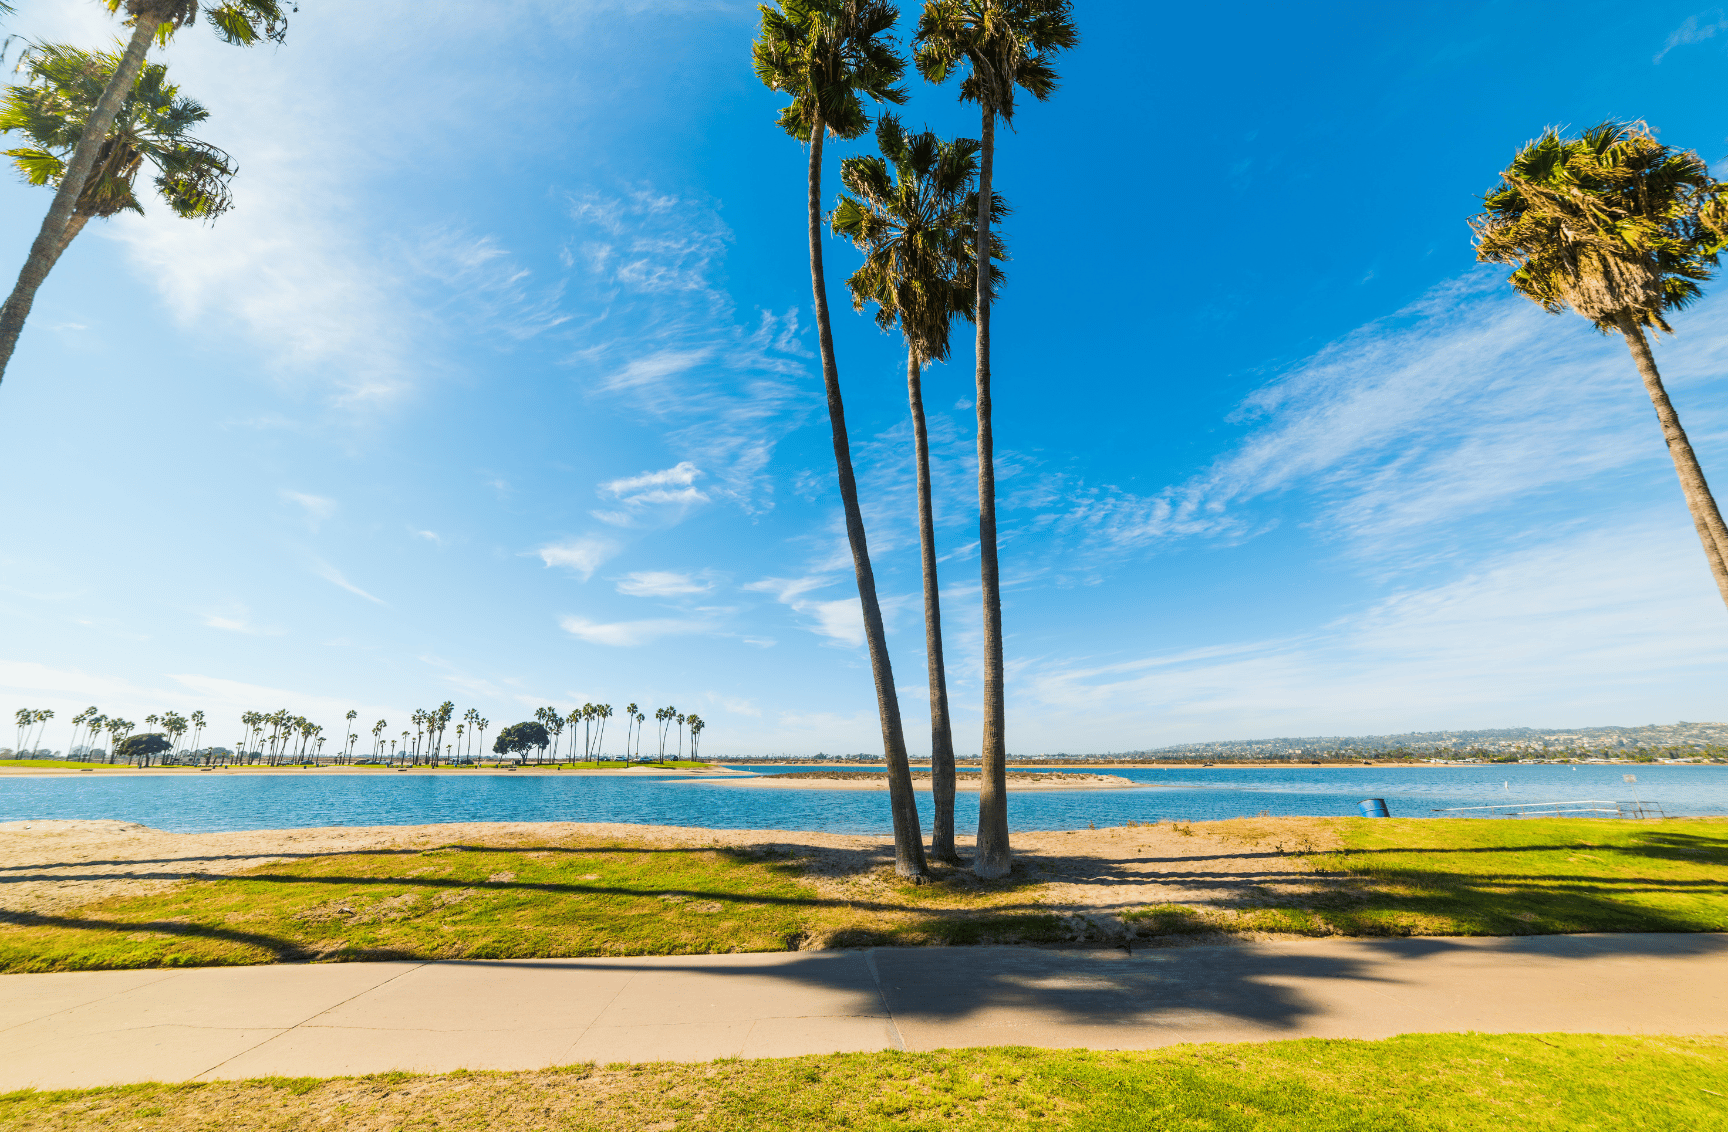 How To Spend 48 Hours In Mission Beach, San Diego